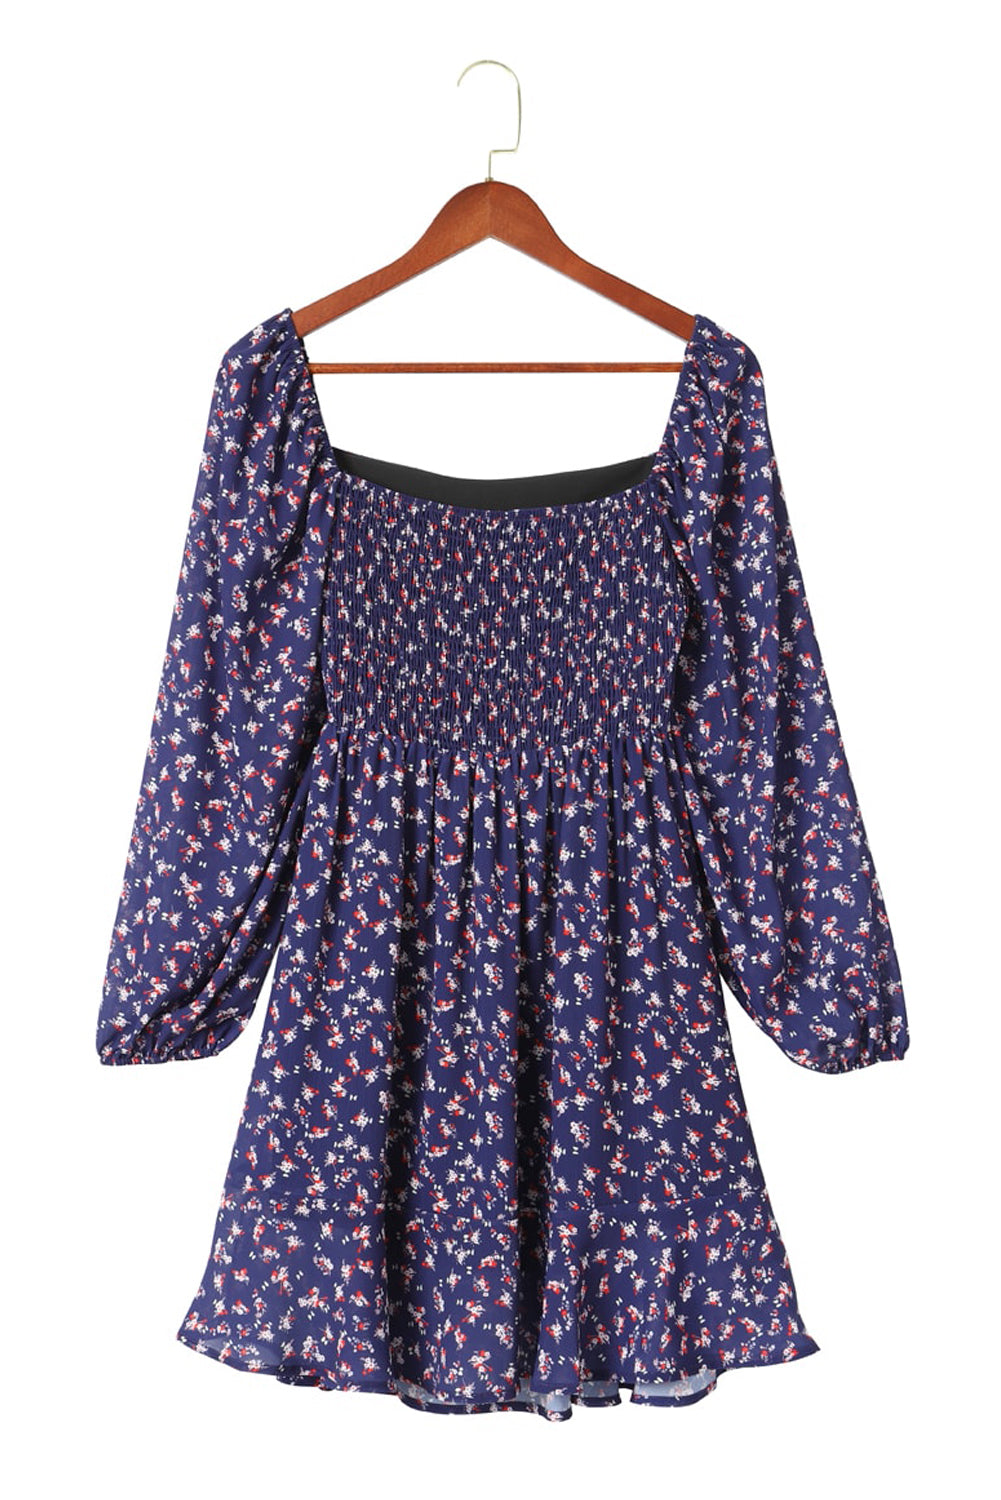 Blue Floral Print Smocked Square Neck Bubble Sleeve Dress